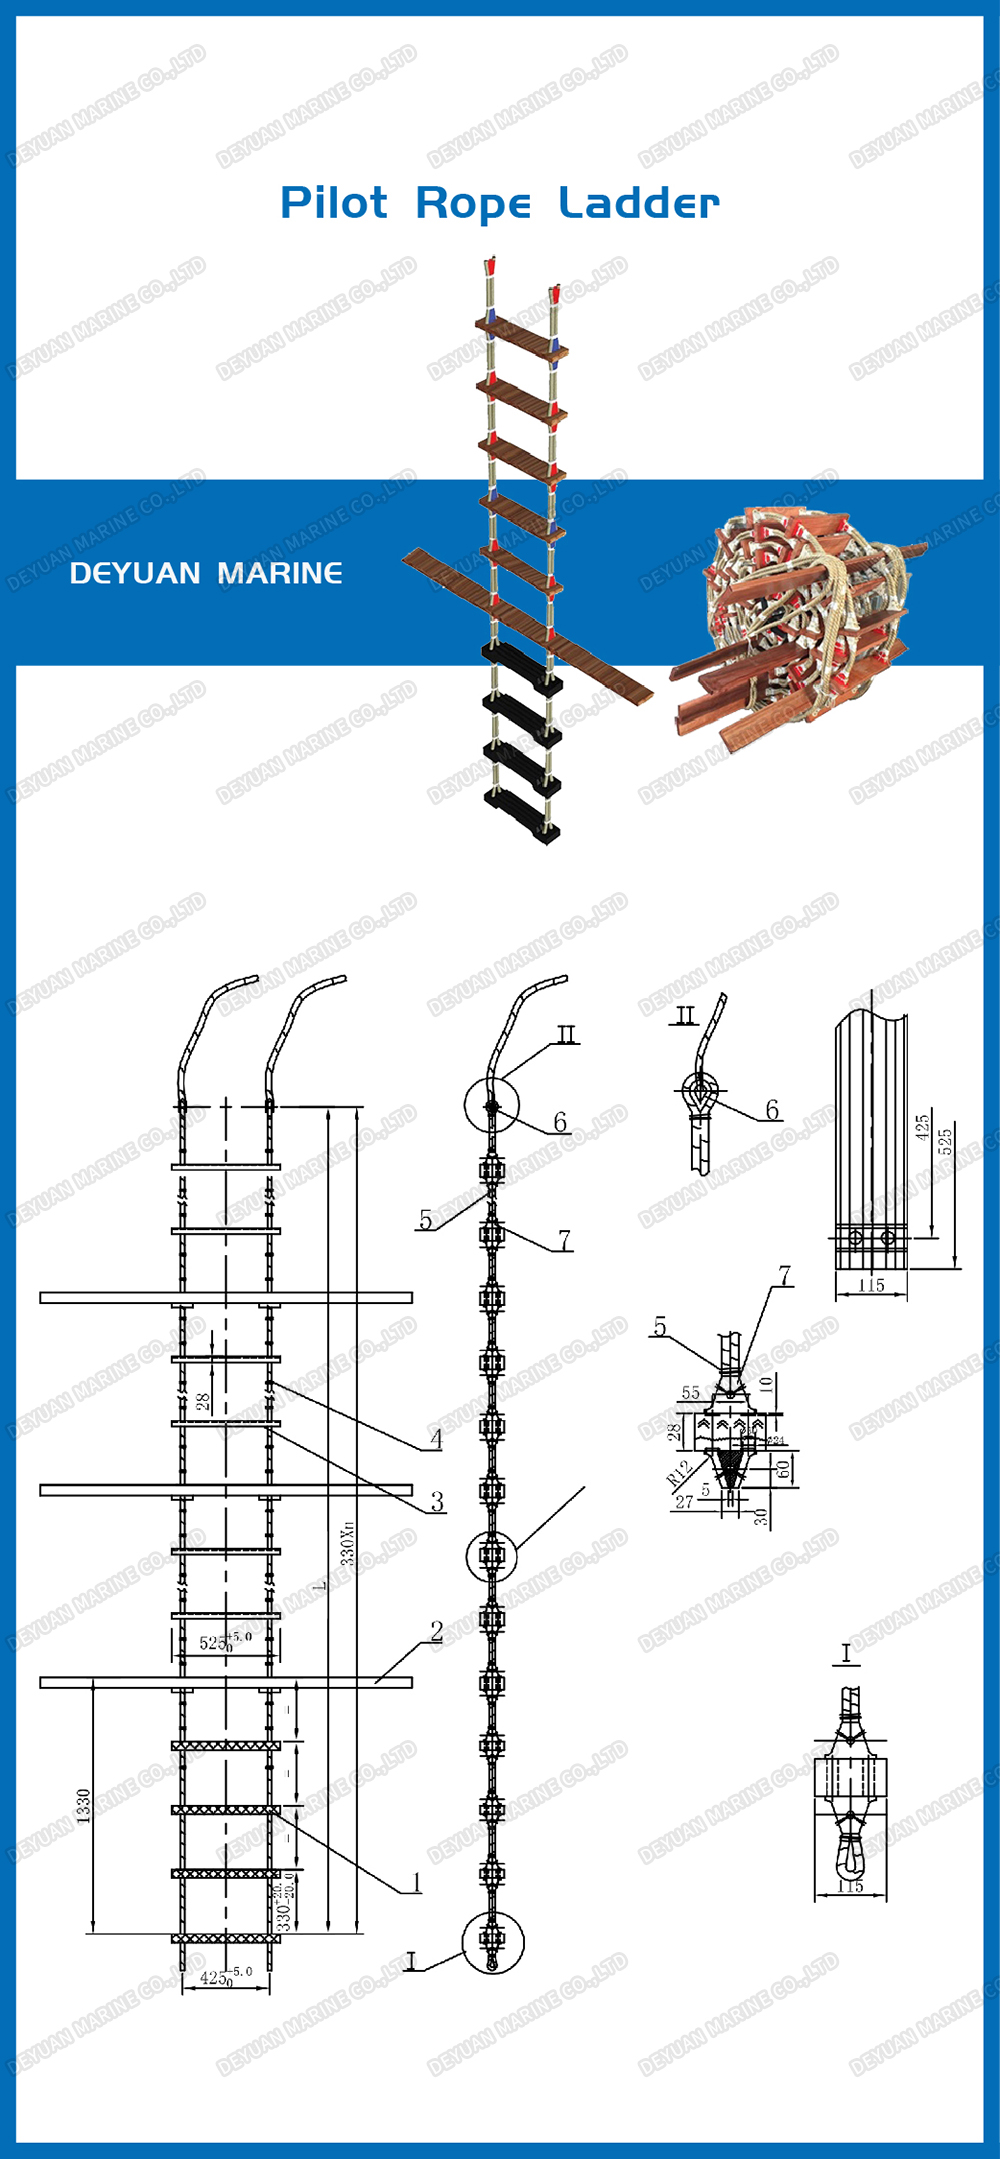 Iso799 Pilot Ladders Solas1974 Deyuan Marine Manufacture And Supplier Of Pilot Ladders From China